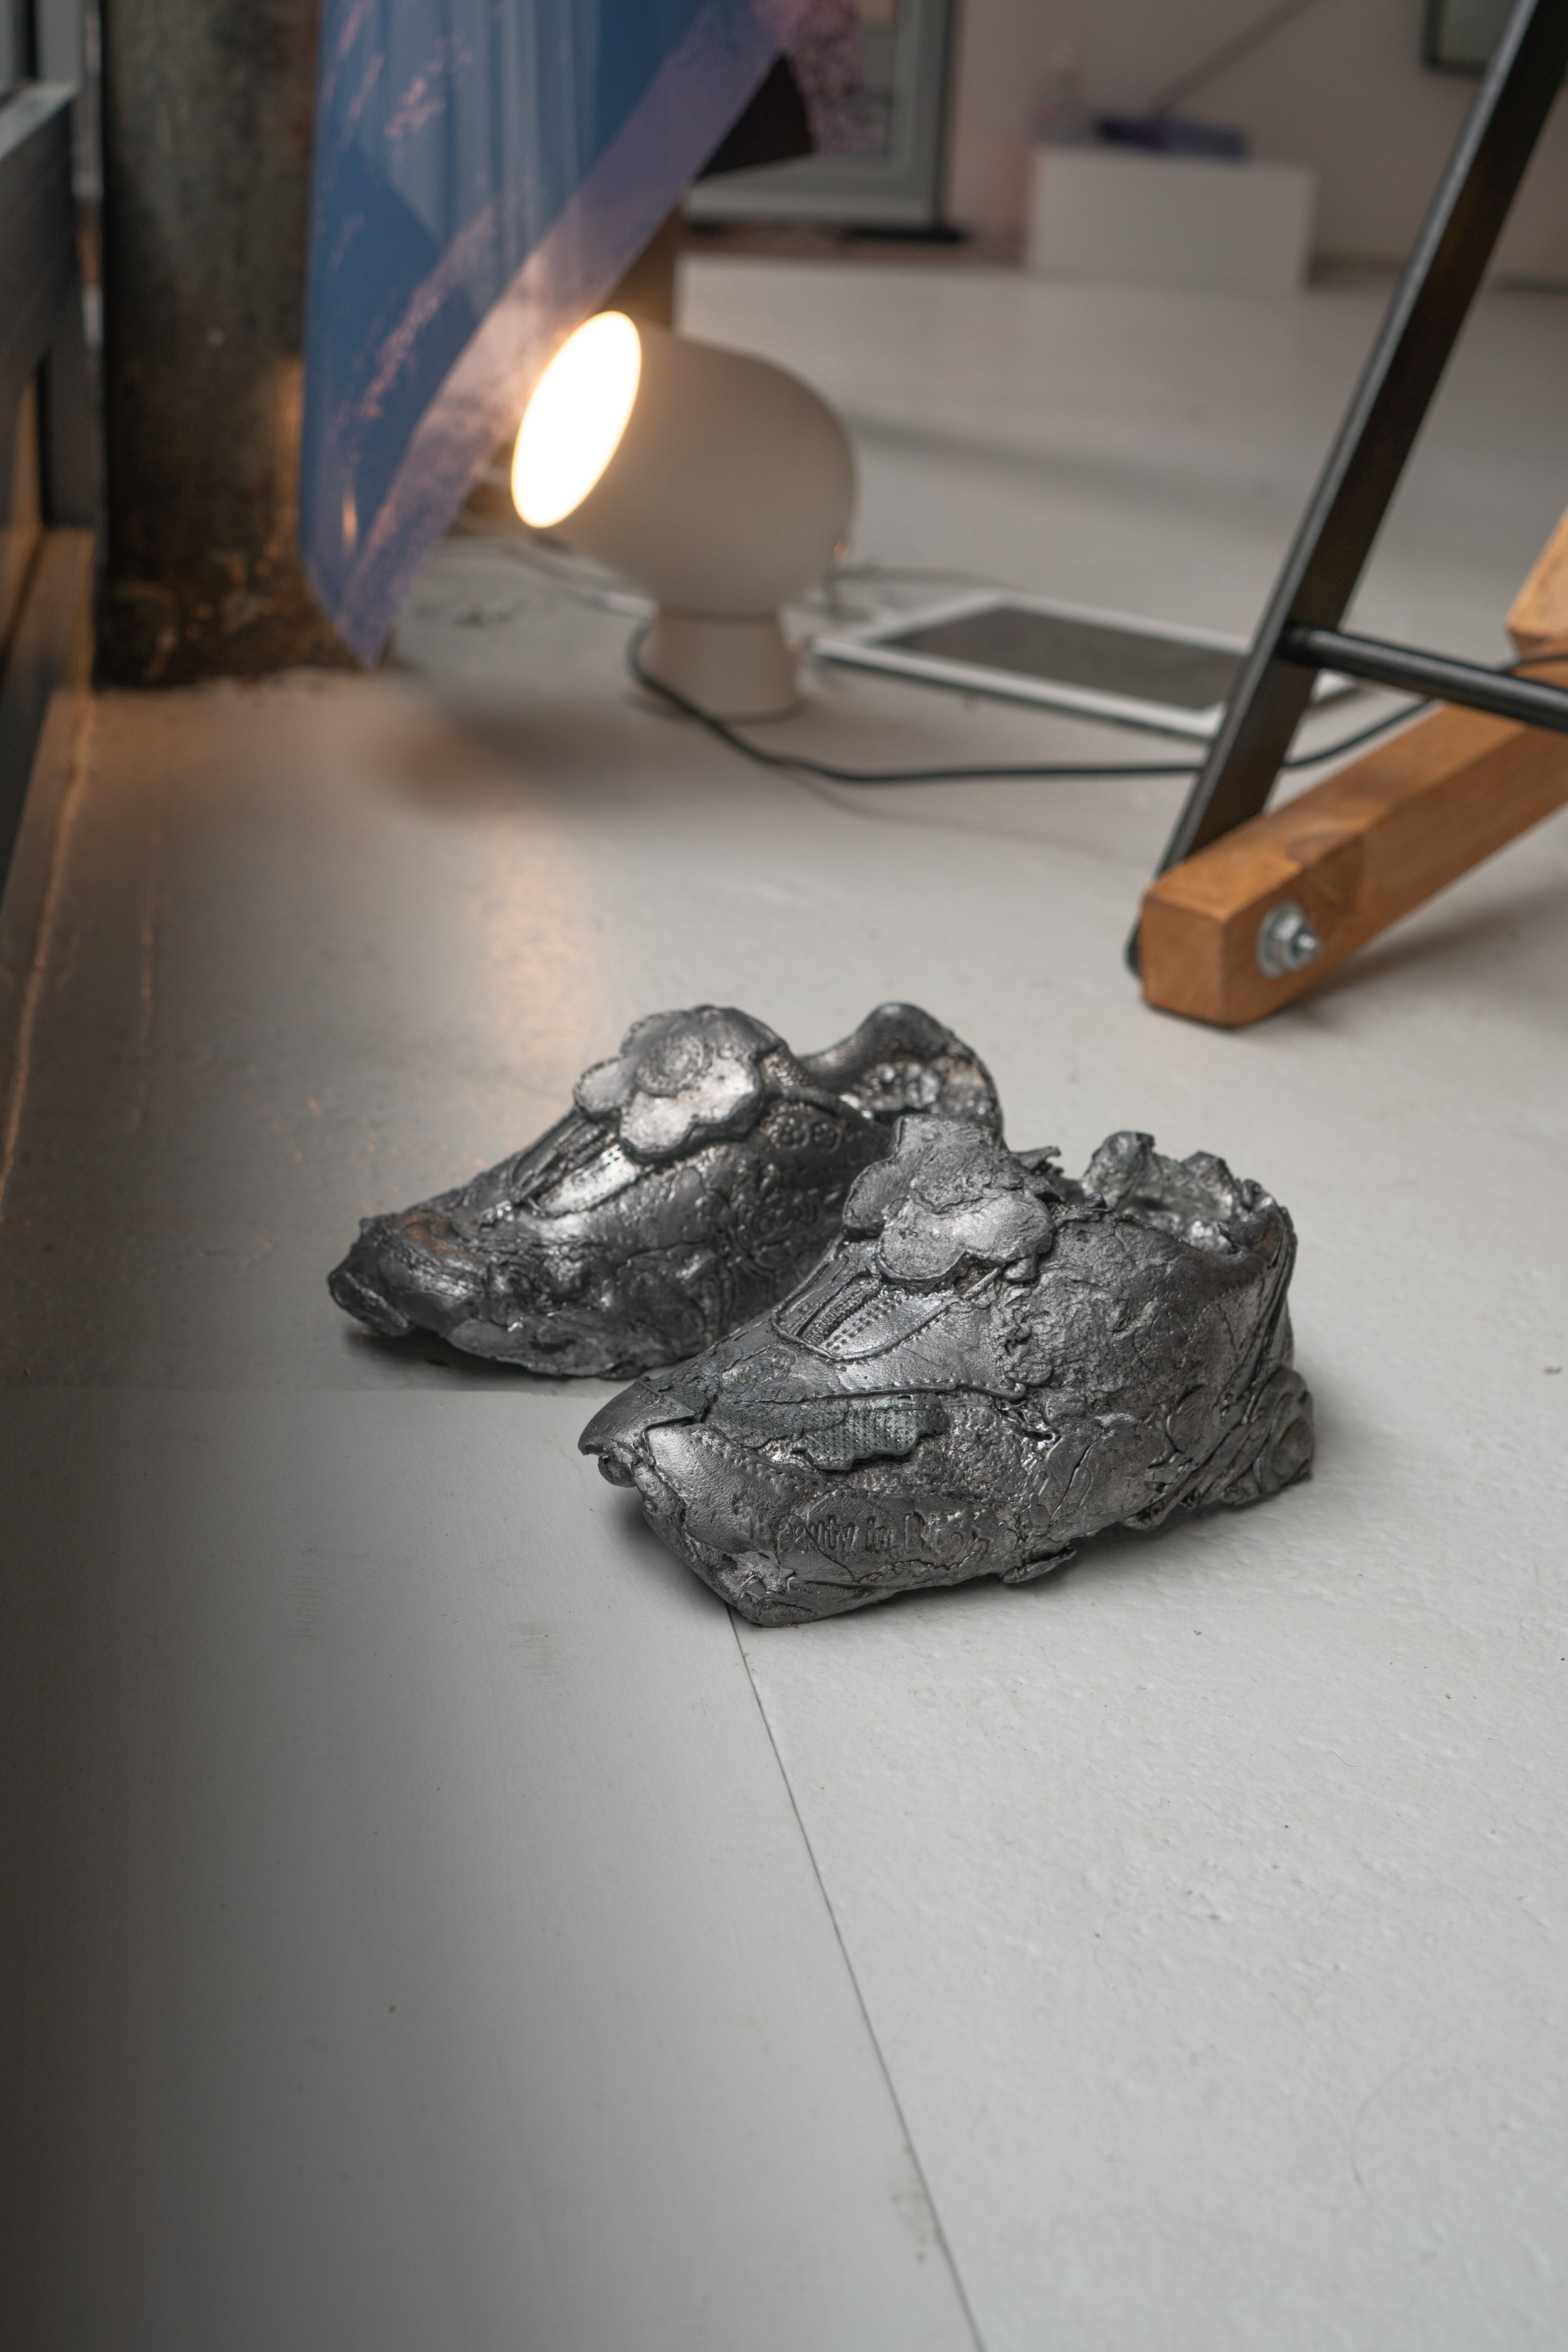 A group exhibition in Julio Artist Space (Paris), on the theme of stillness in a moving world. This is one of three pairs of lead shoes I exhibited from the series Lead me (ongoing.)